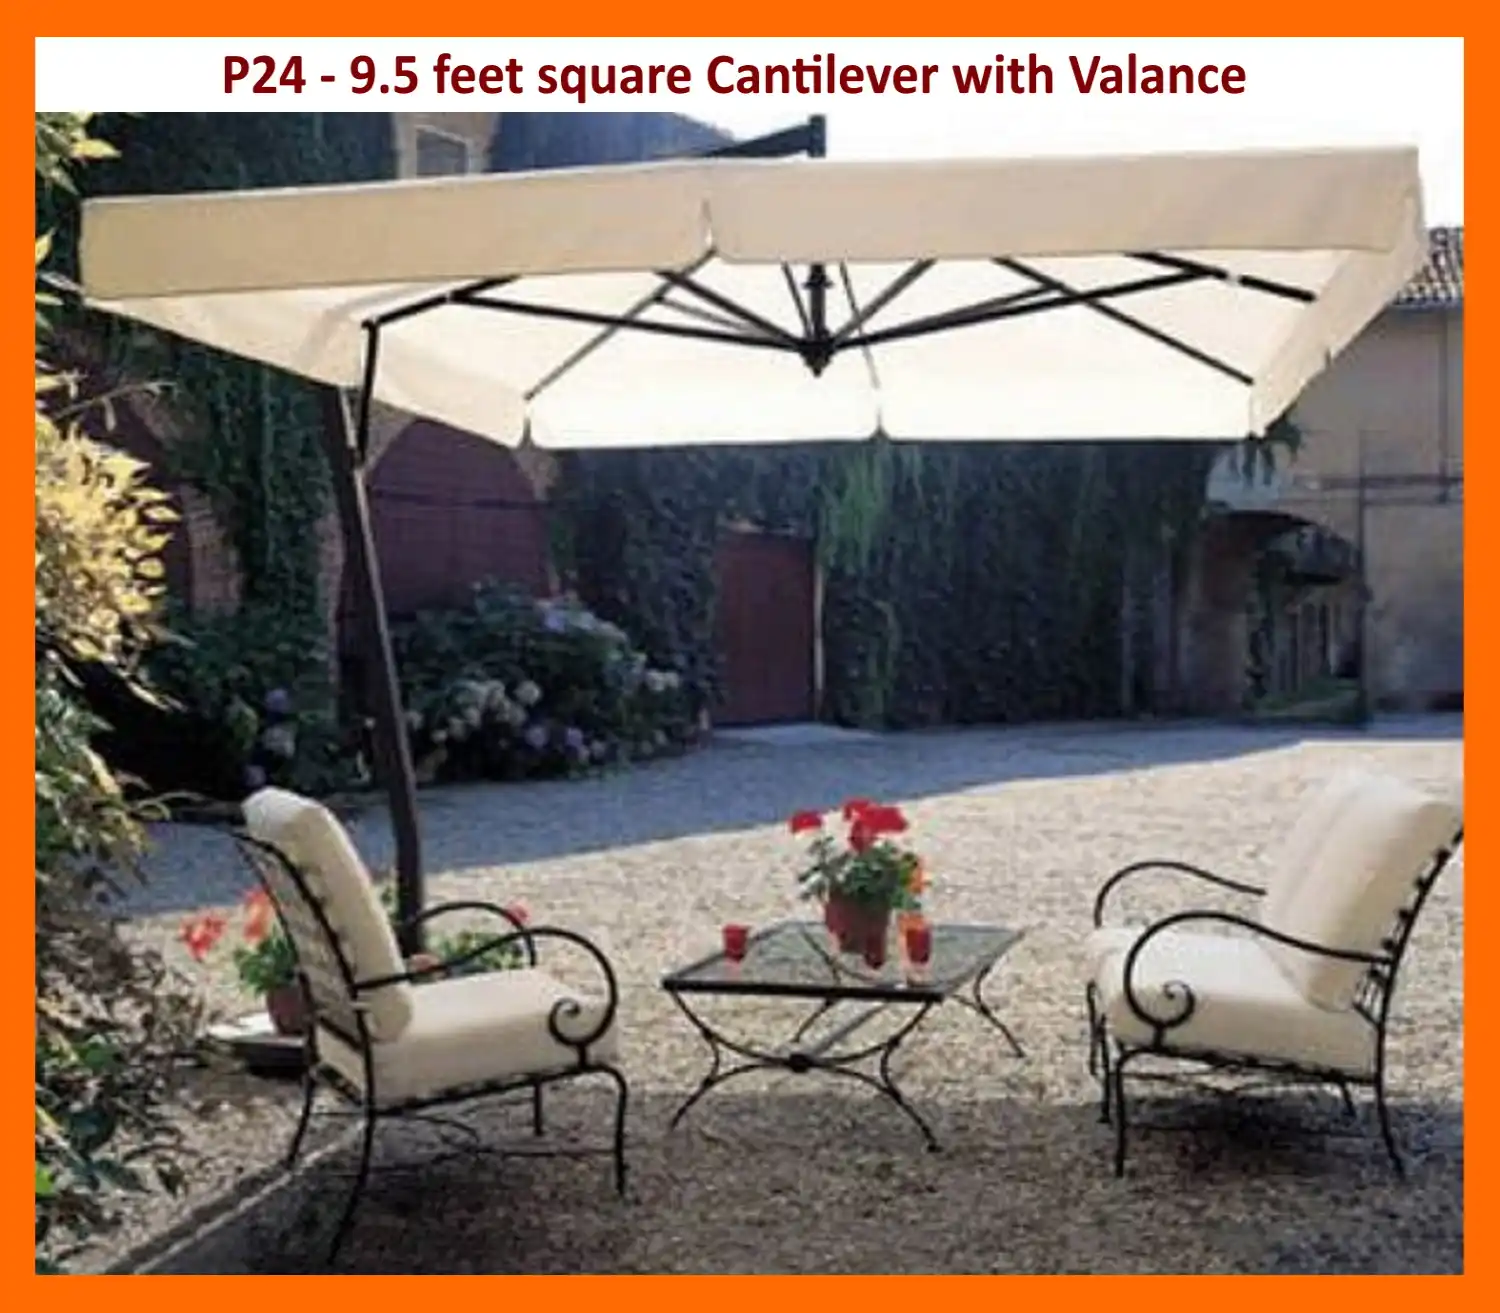 P24 - 9.5 feet square Cantilever with Valance